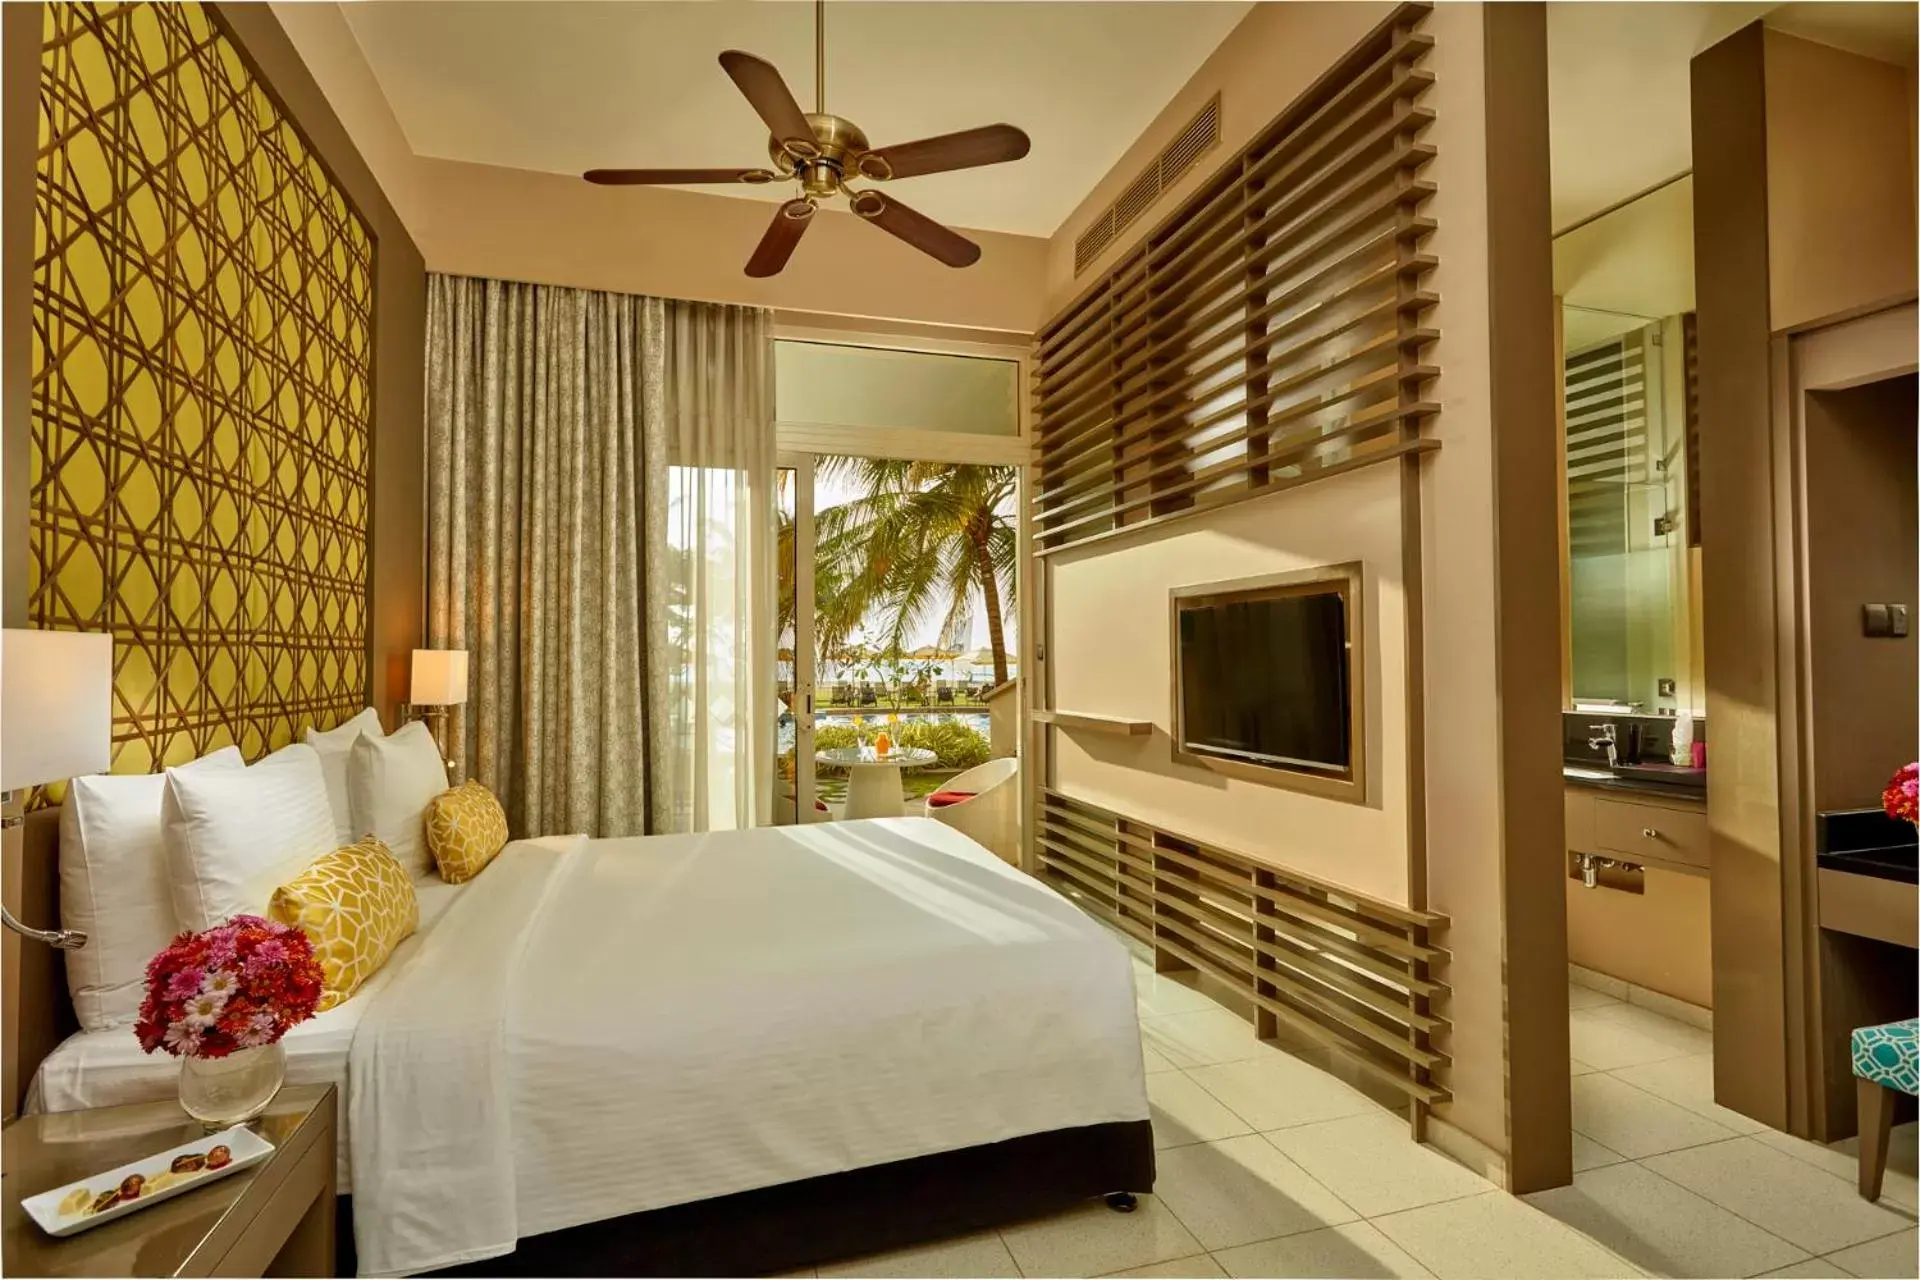 Deluxe King Room with Sea View with Early Check-in / Late Check-out (Subject to Availability)  - single occupancy in Heritance Negombo